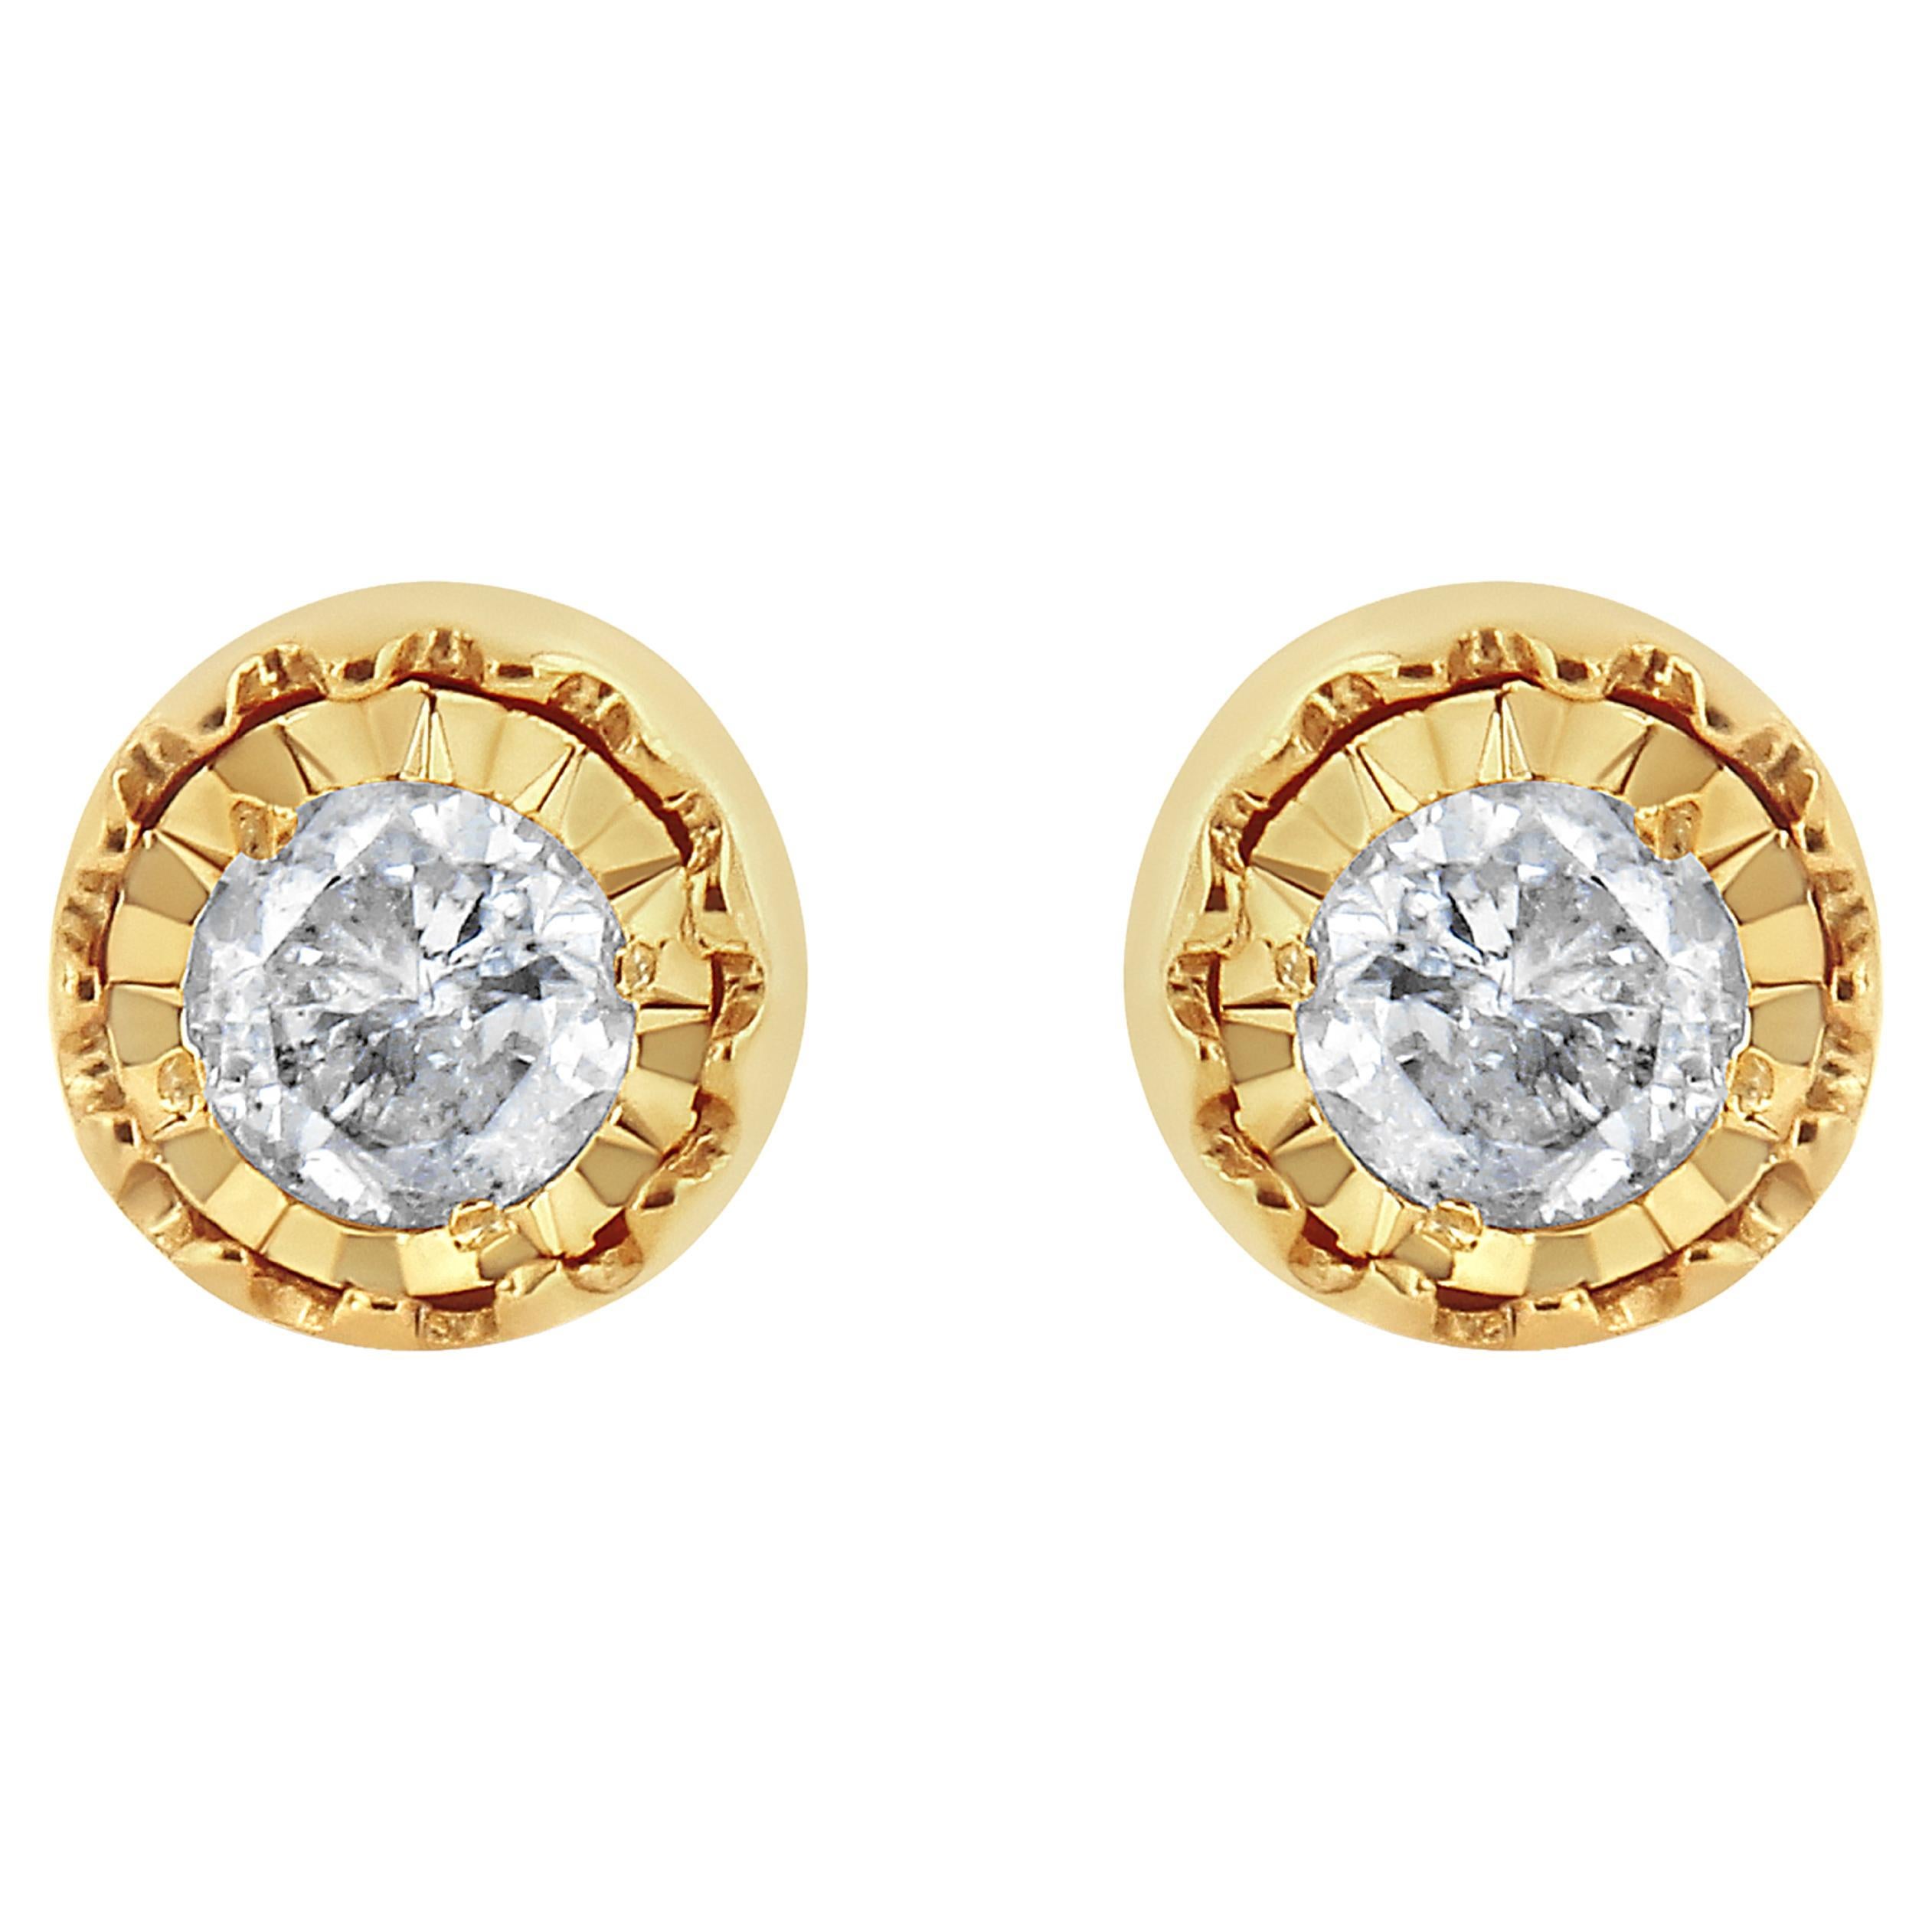 10K Yellow Gold over Silver 3/8 Carat Diamond Miracle Set Stud Earrings